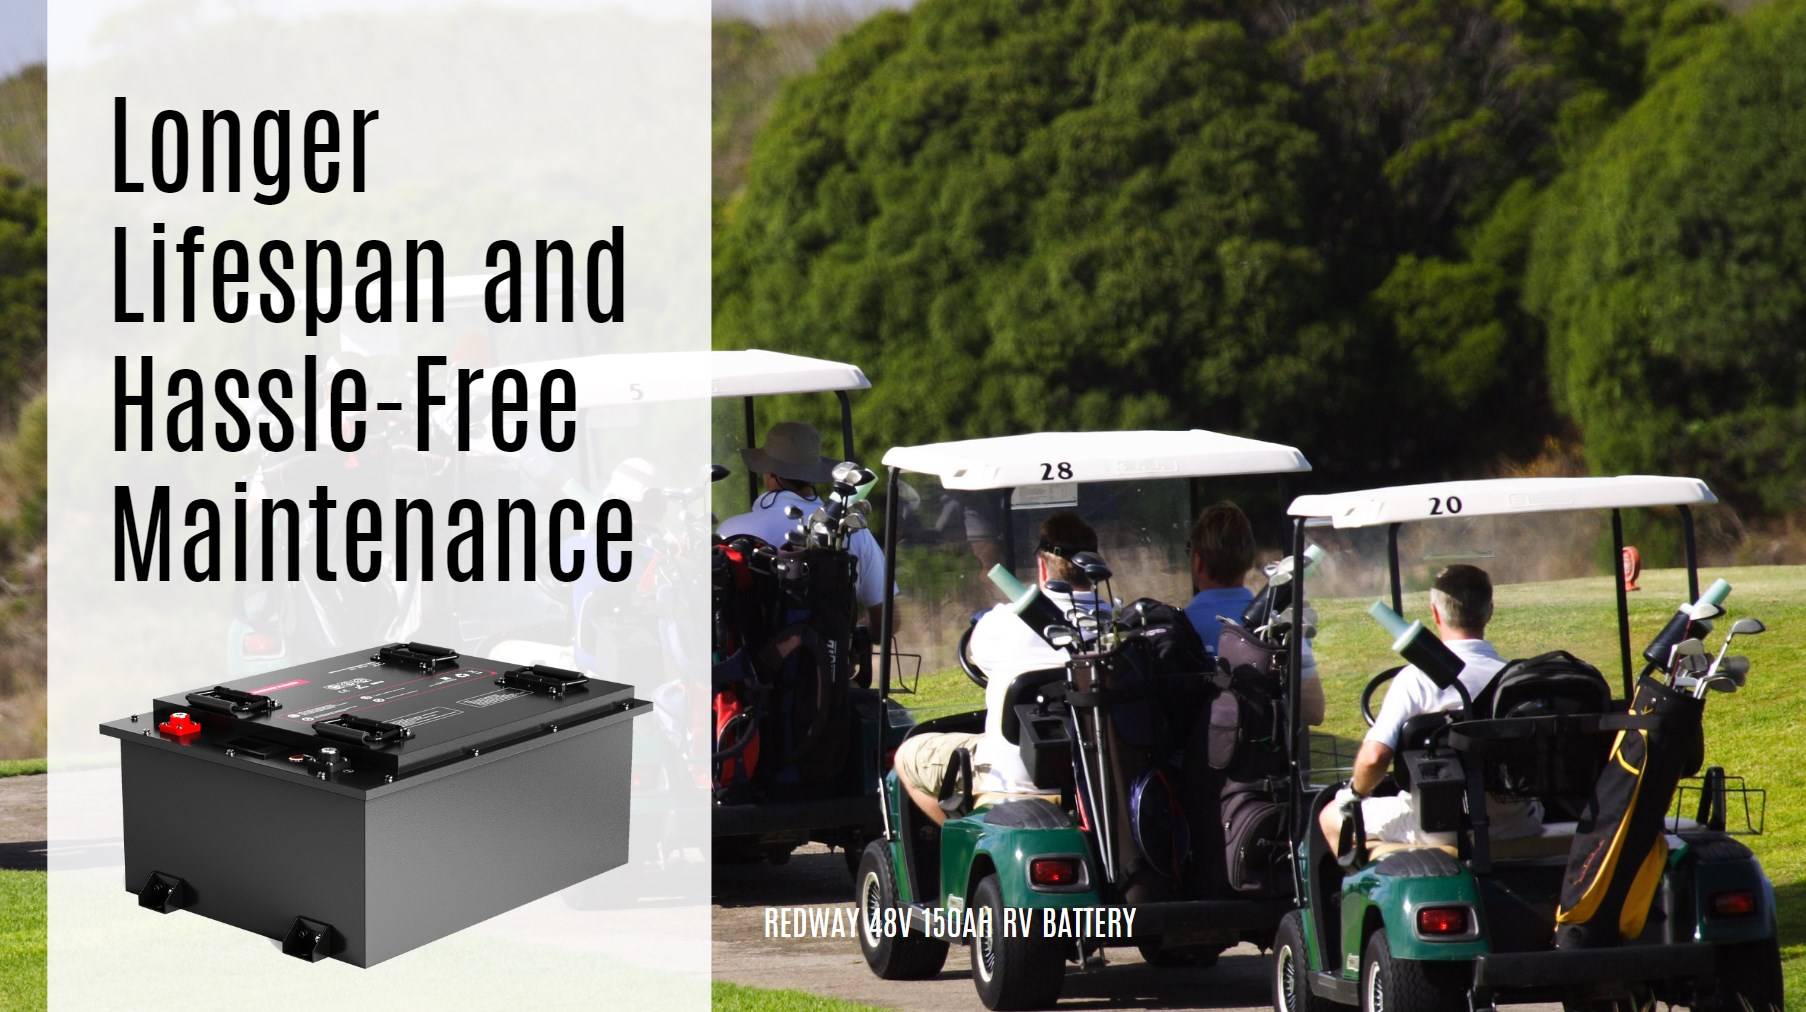 Longer Lifespan and Hassle-Free Maintenance. Benefits of Lithium Batteries for Golf Cart Solar Systems. 48V 150AH GOLF CART BATTERY REDWAY CATL